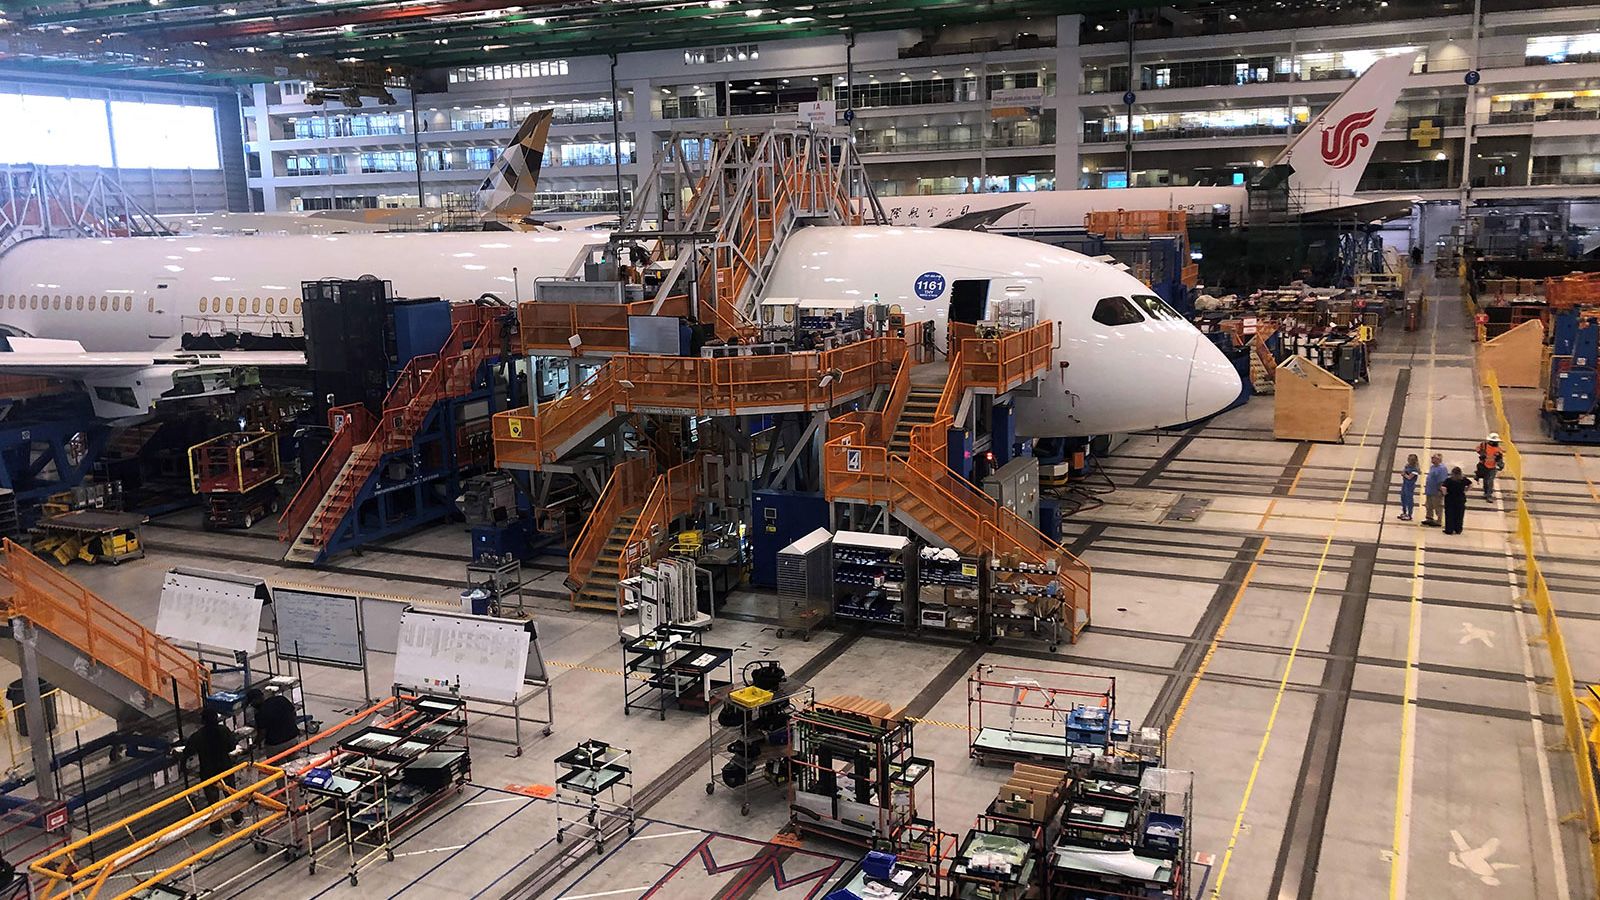 Boeing Under Investigation by FAA for Possible 787 Dreamliner Record Falsification